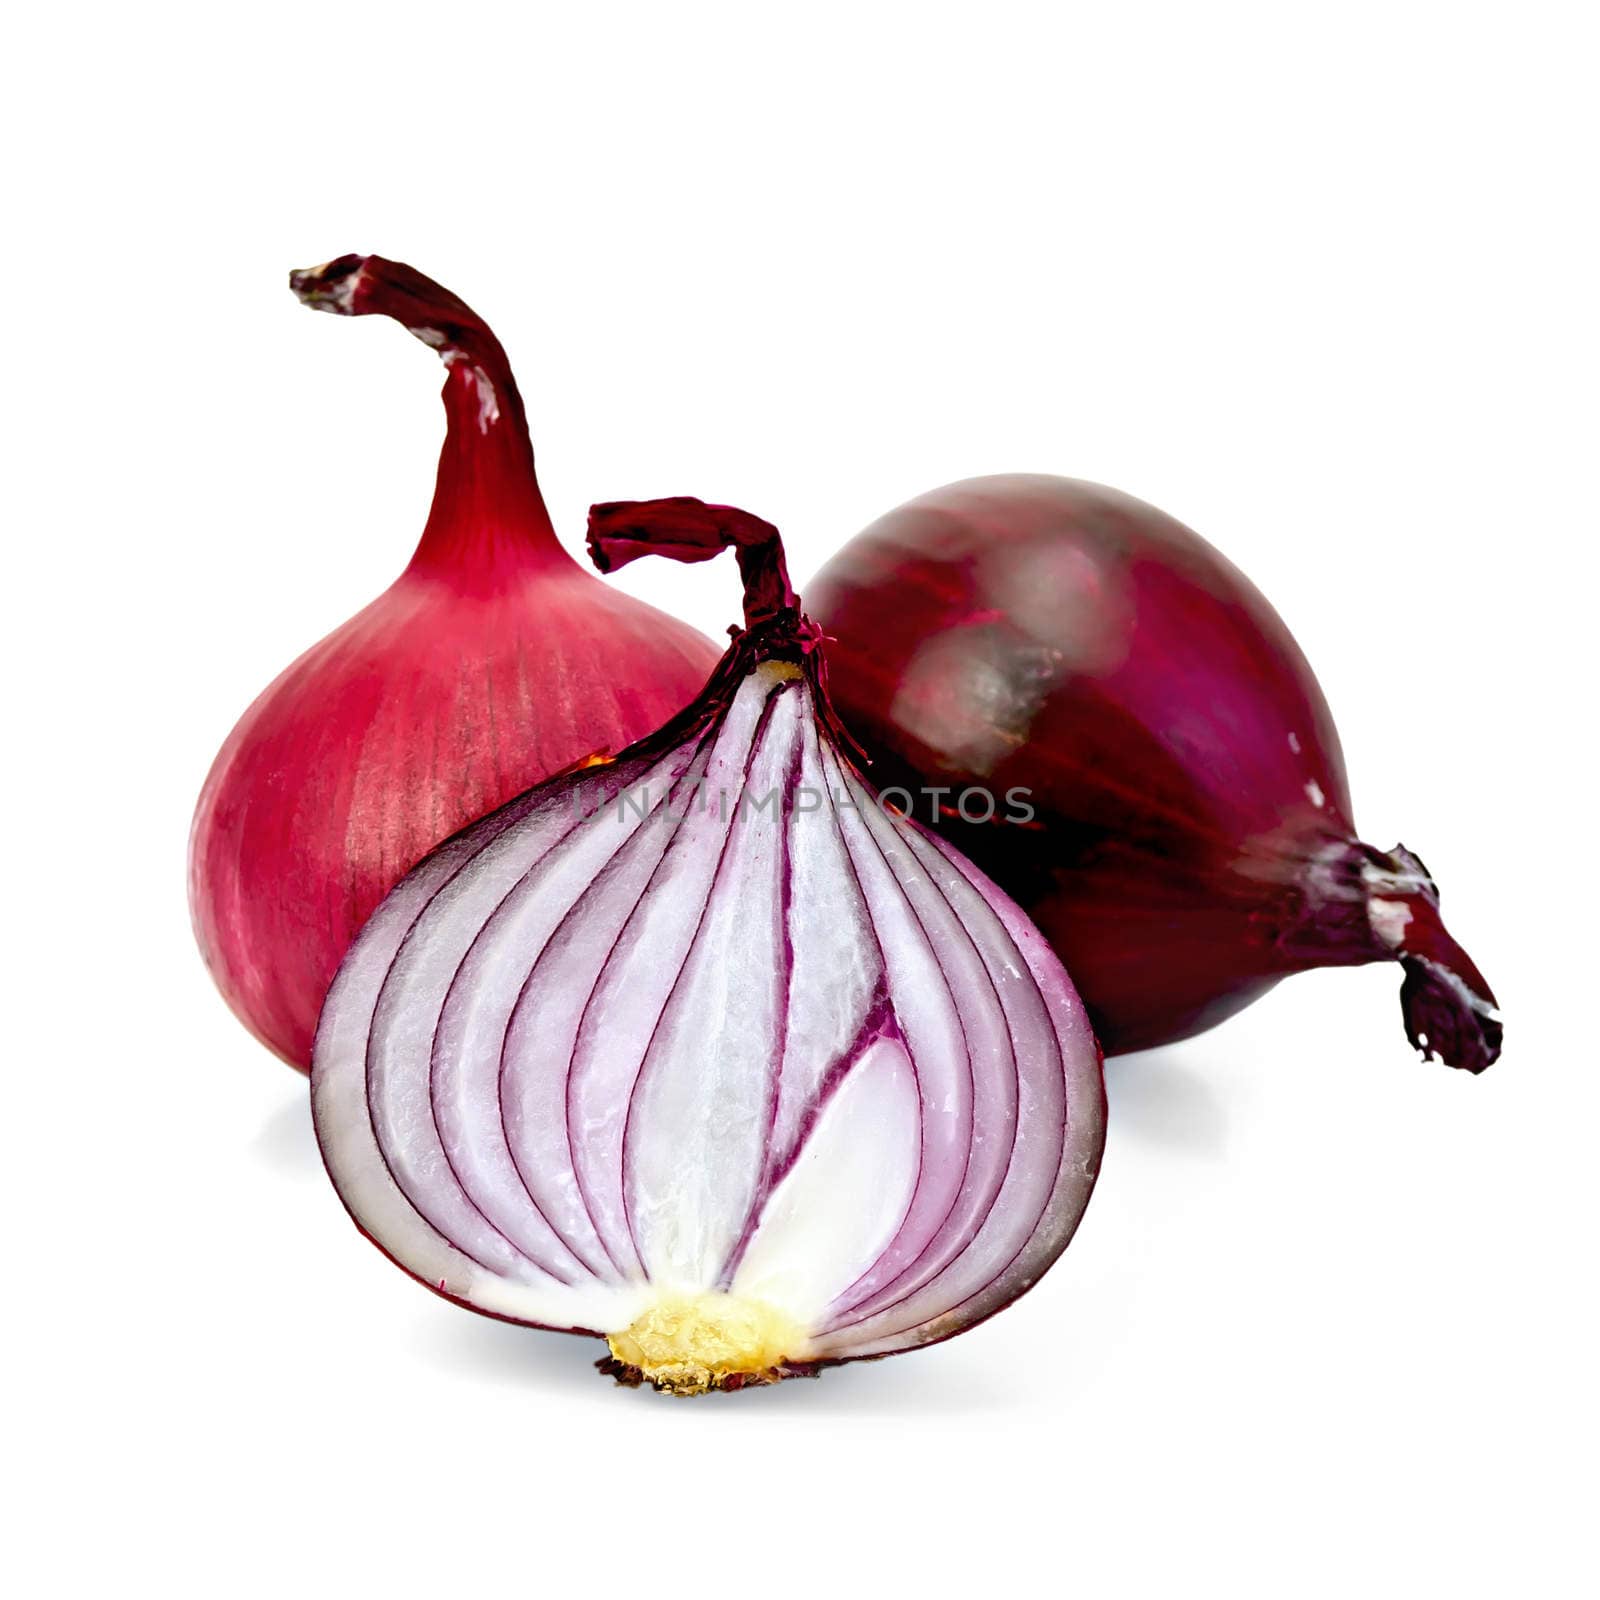 Two whole and one sliced purple onion isolated on a white background